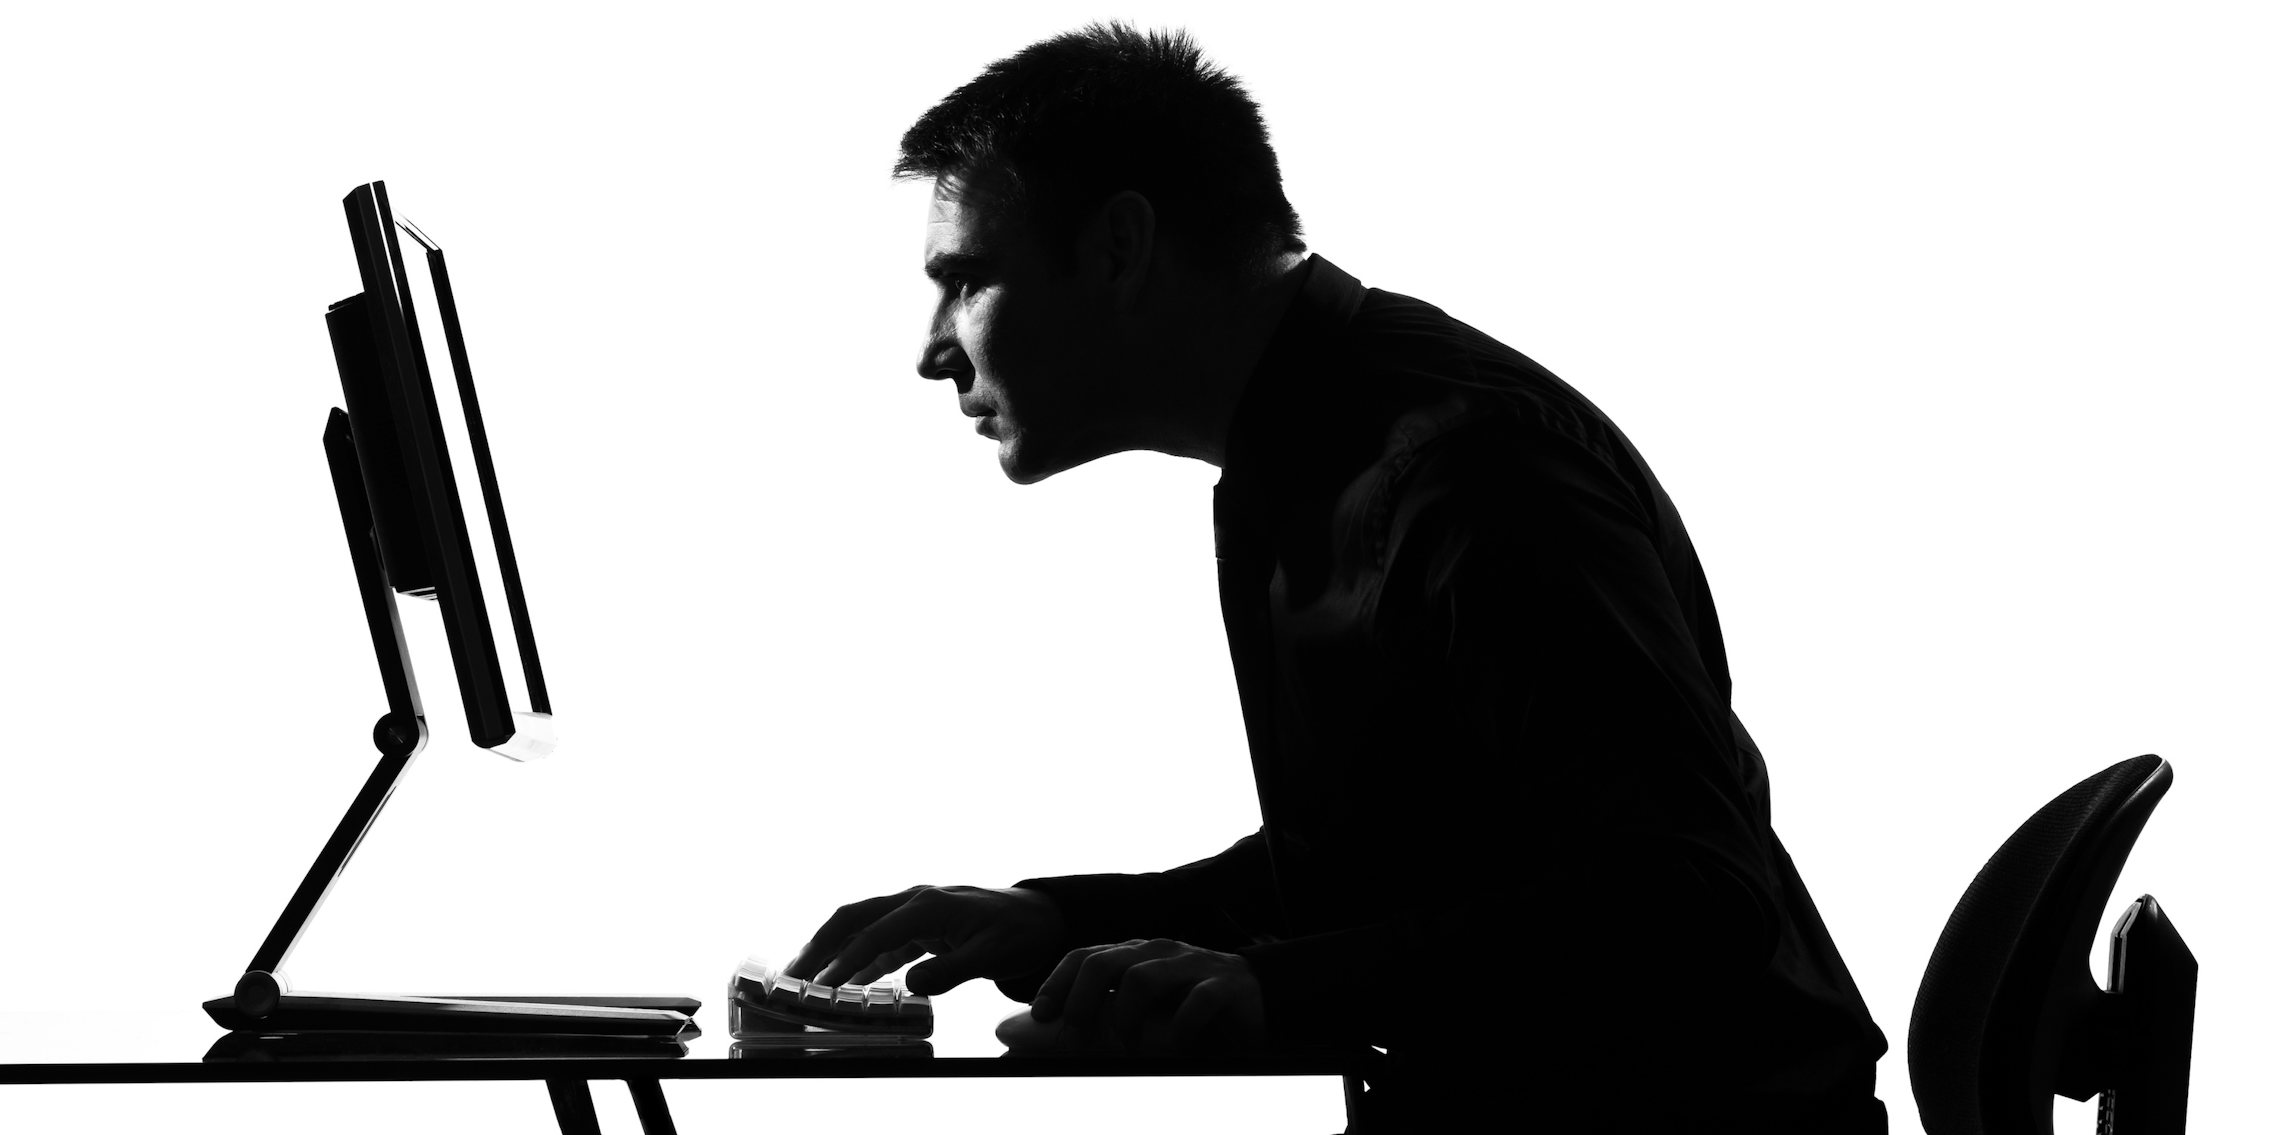 Silhouette of Man on Computer